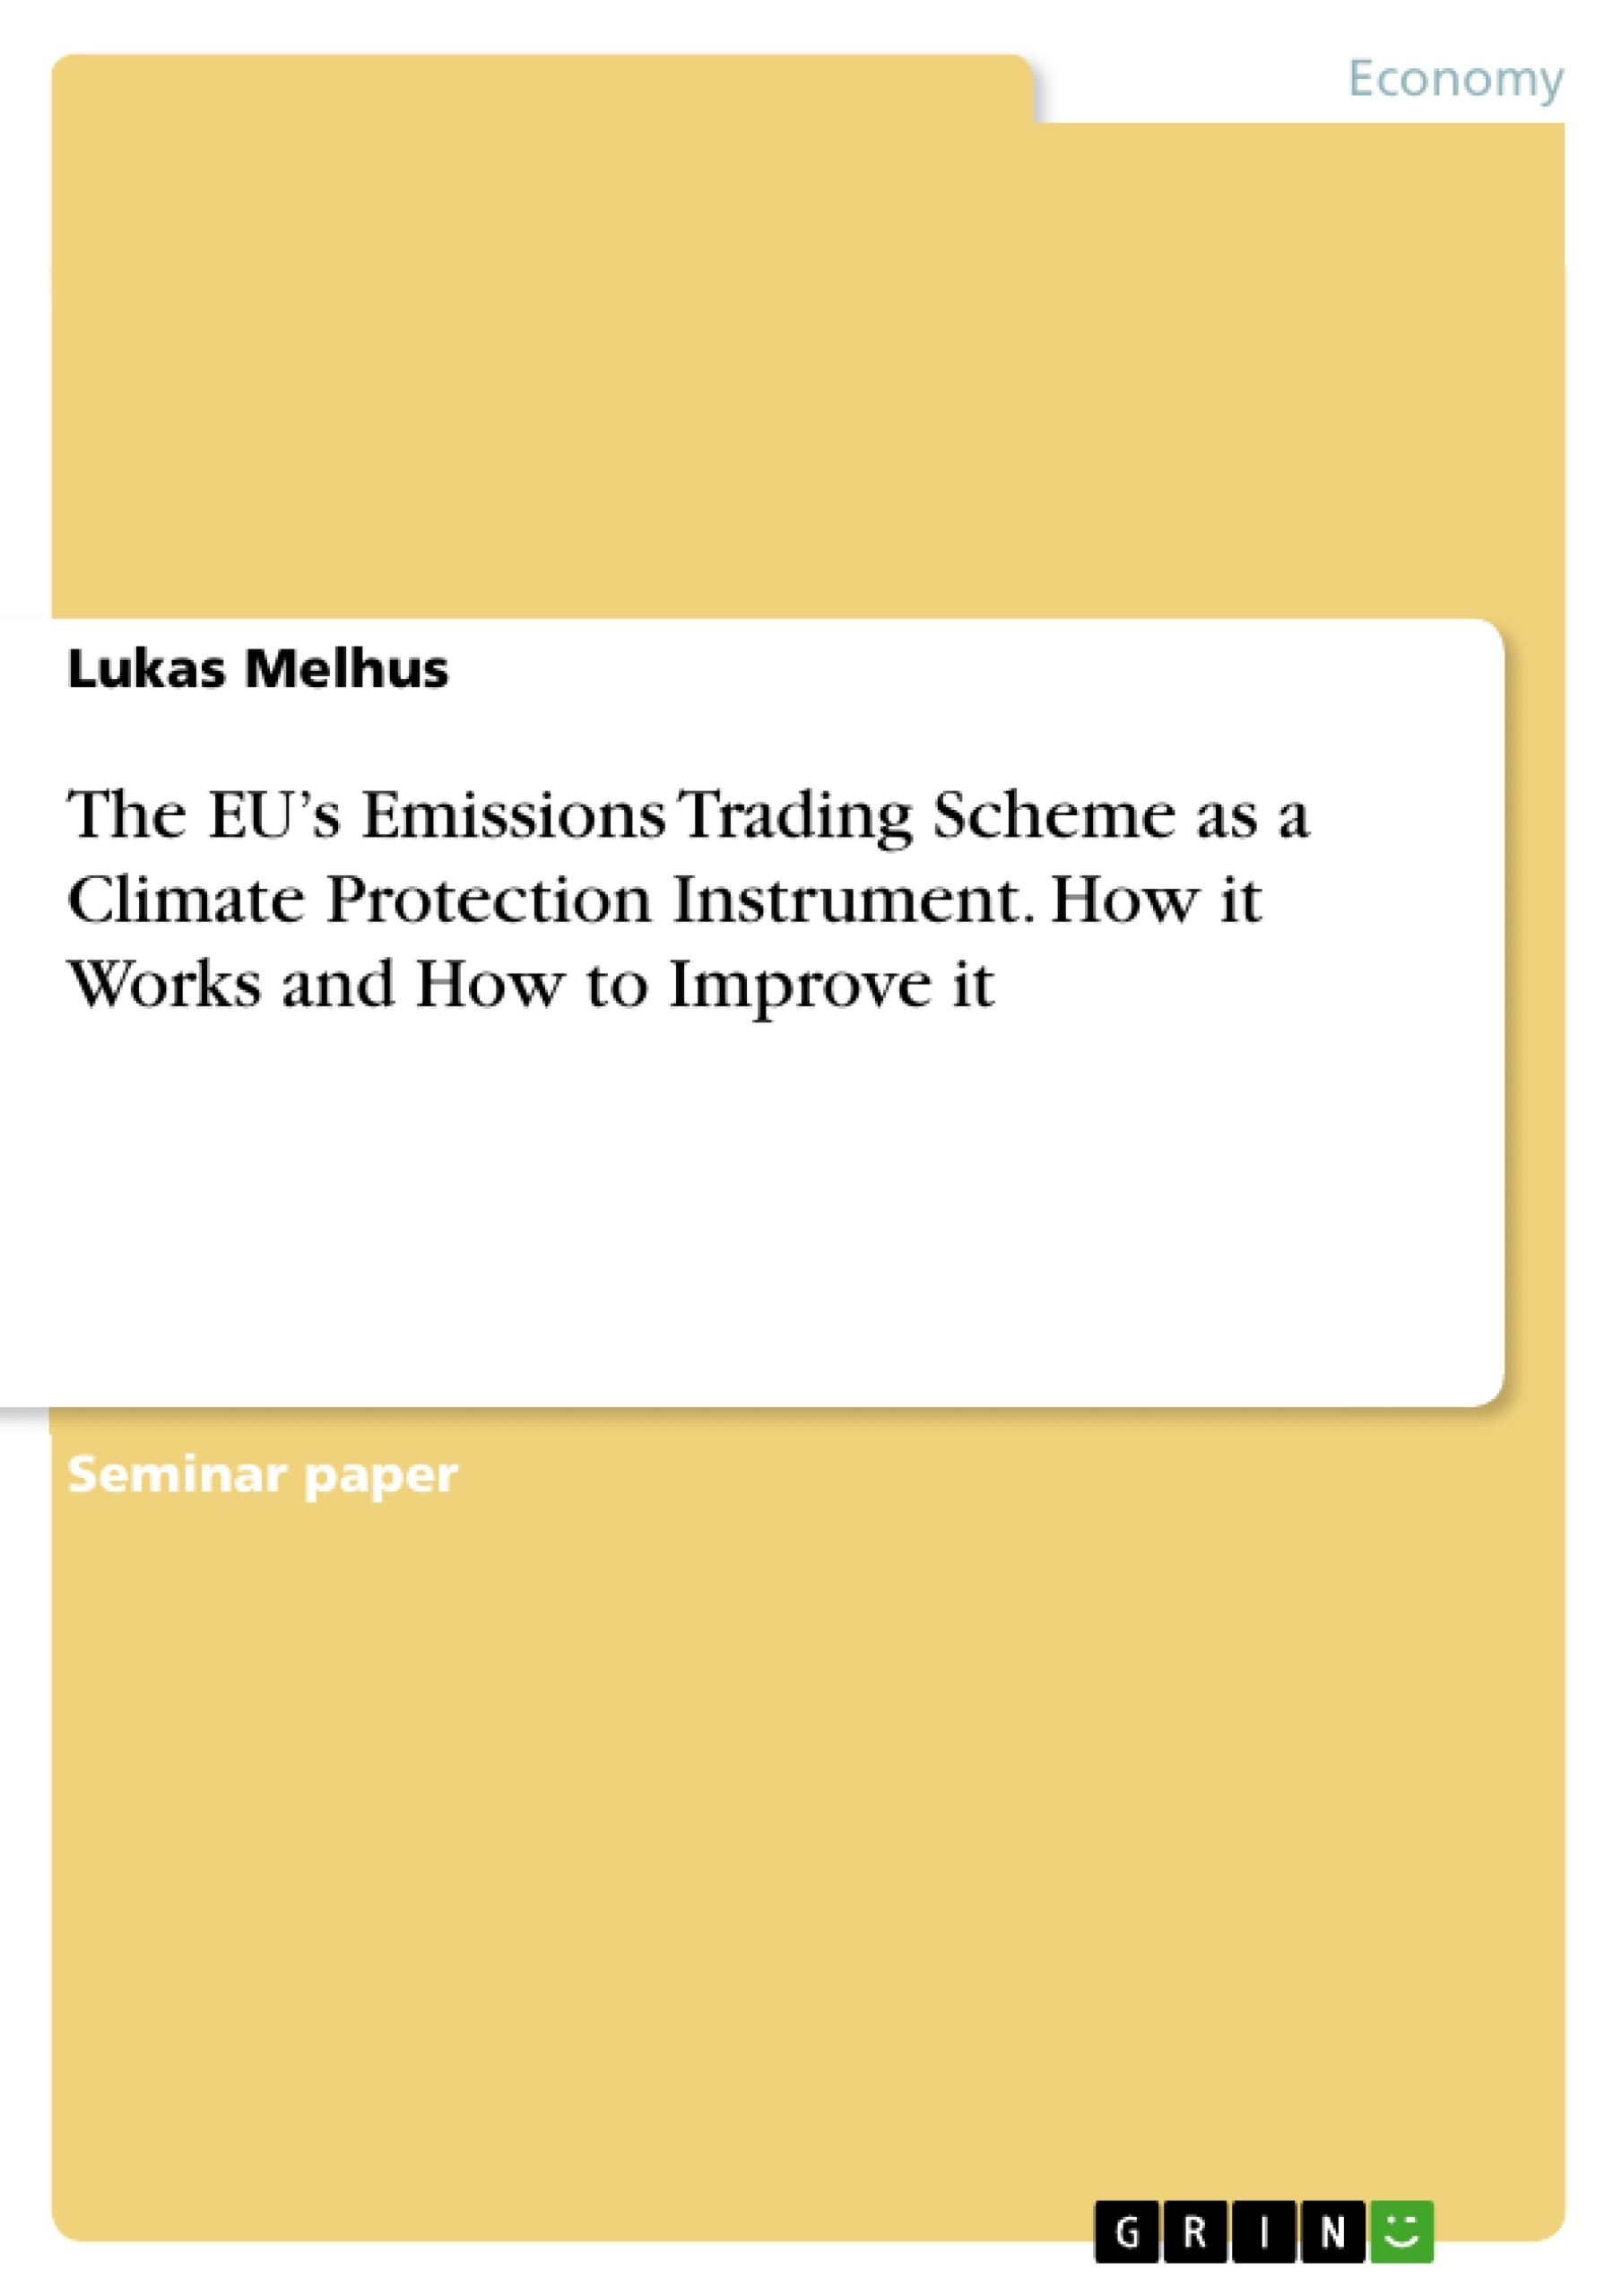 Title: The EU’s Emissions Trading Scheme as a Climate Protection Instrument. How it Works and How to Improve it